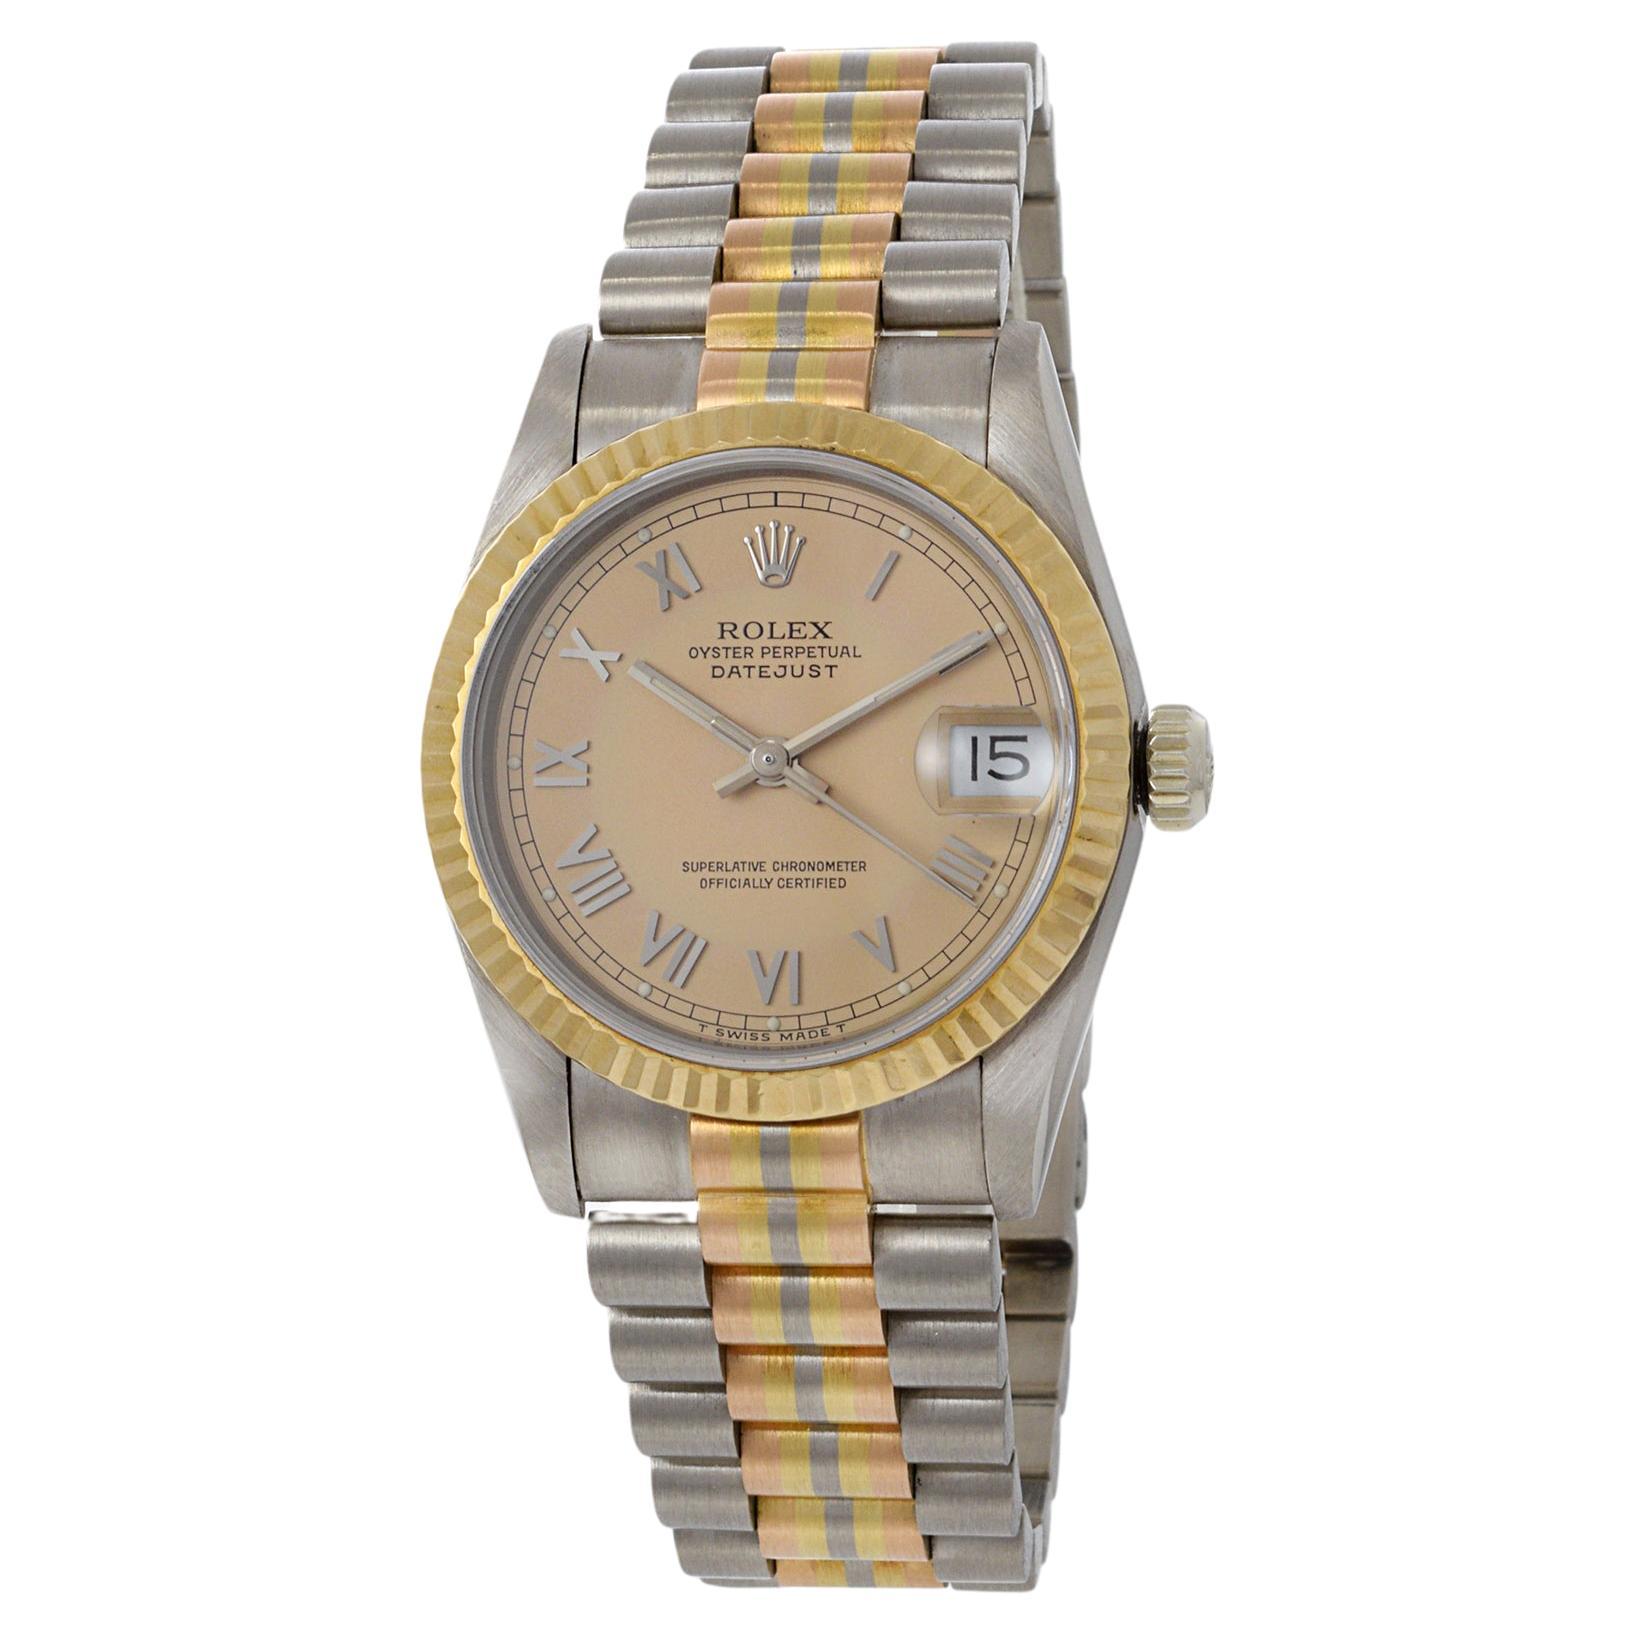 Rolex Datejust 31 Tridor 18K Yellow, White, and Rose Gold For Sale